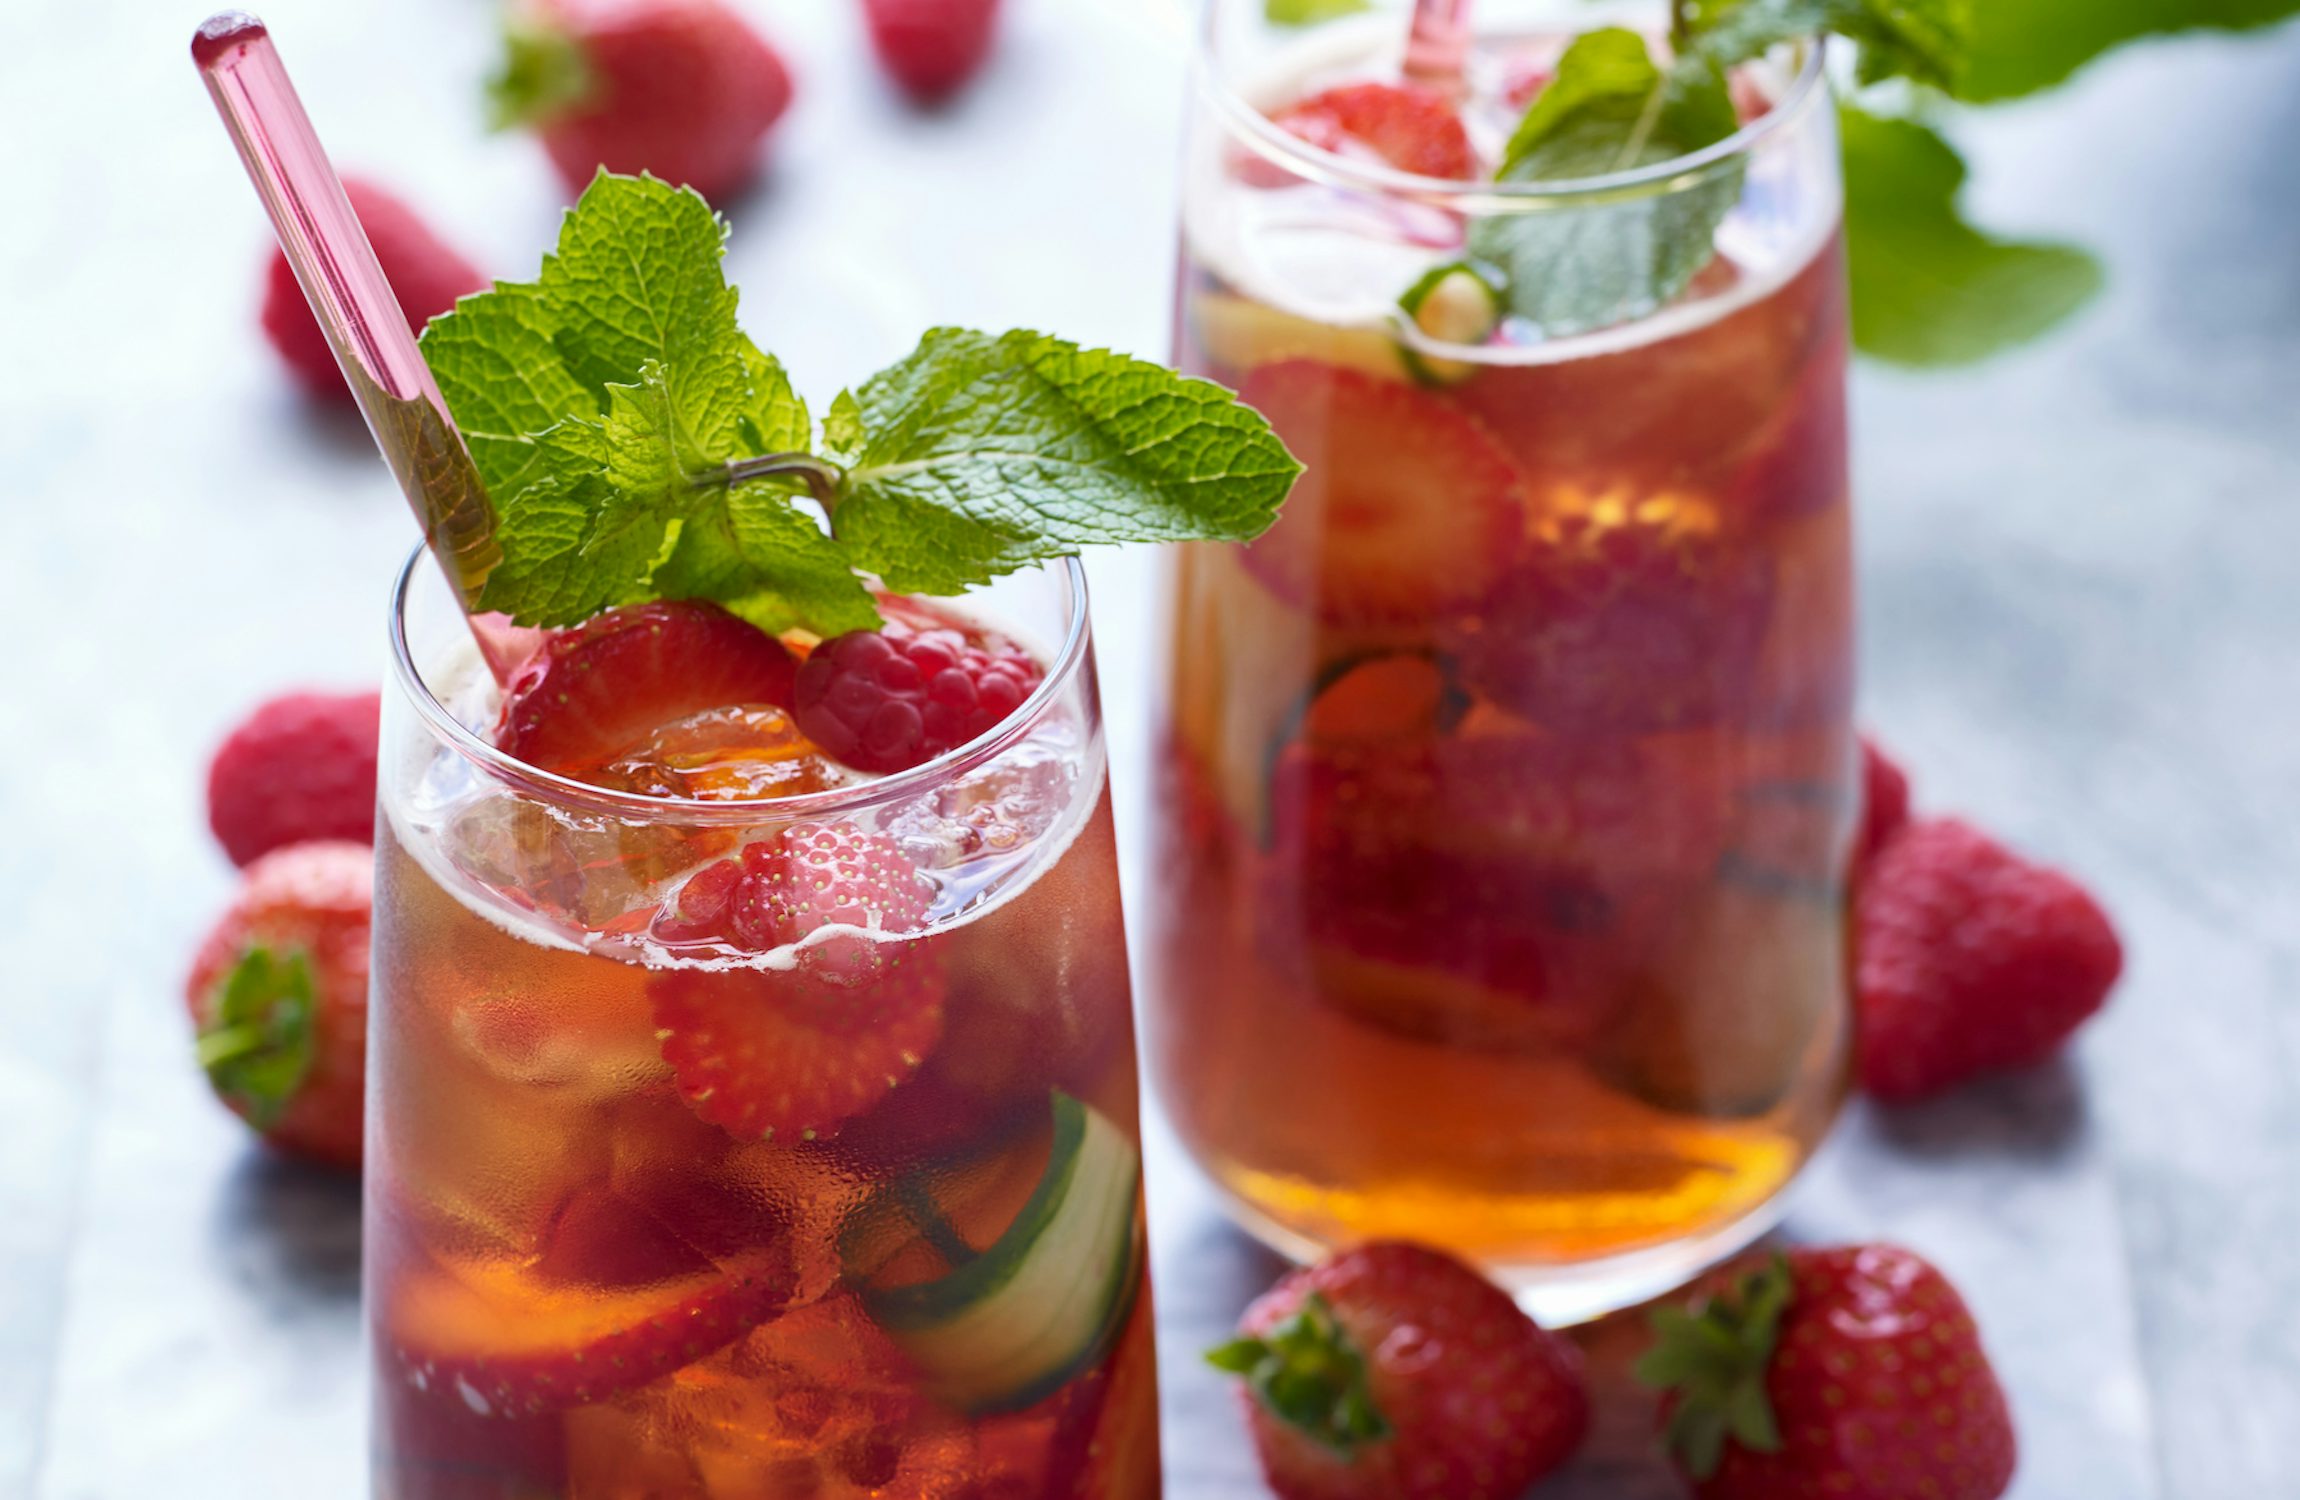 Perfect Summer Pimm’s